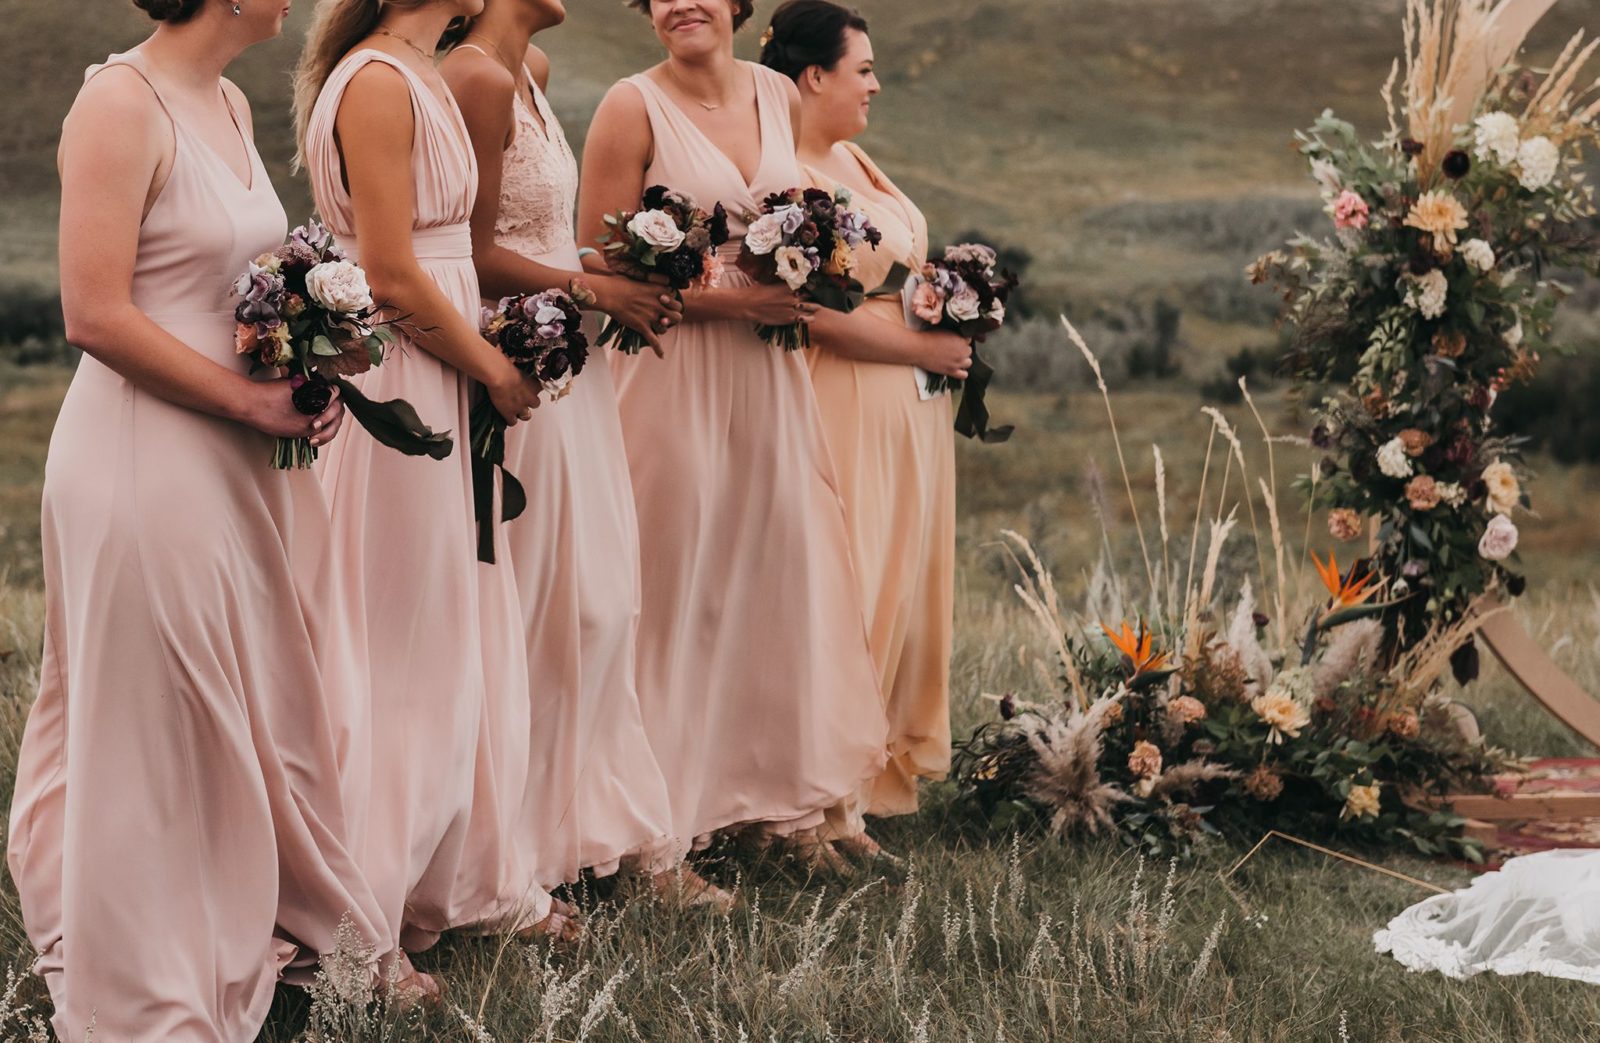 Real Wedding - Countryside Nuptials & Moroccan Styled Reception - featured on Junebug and Bronte Bride, boho wedding, bridesmaids